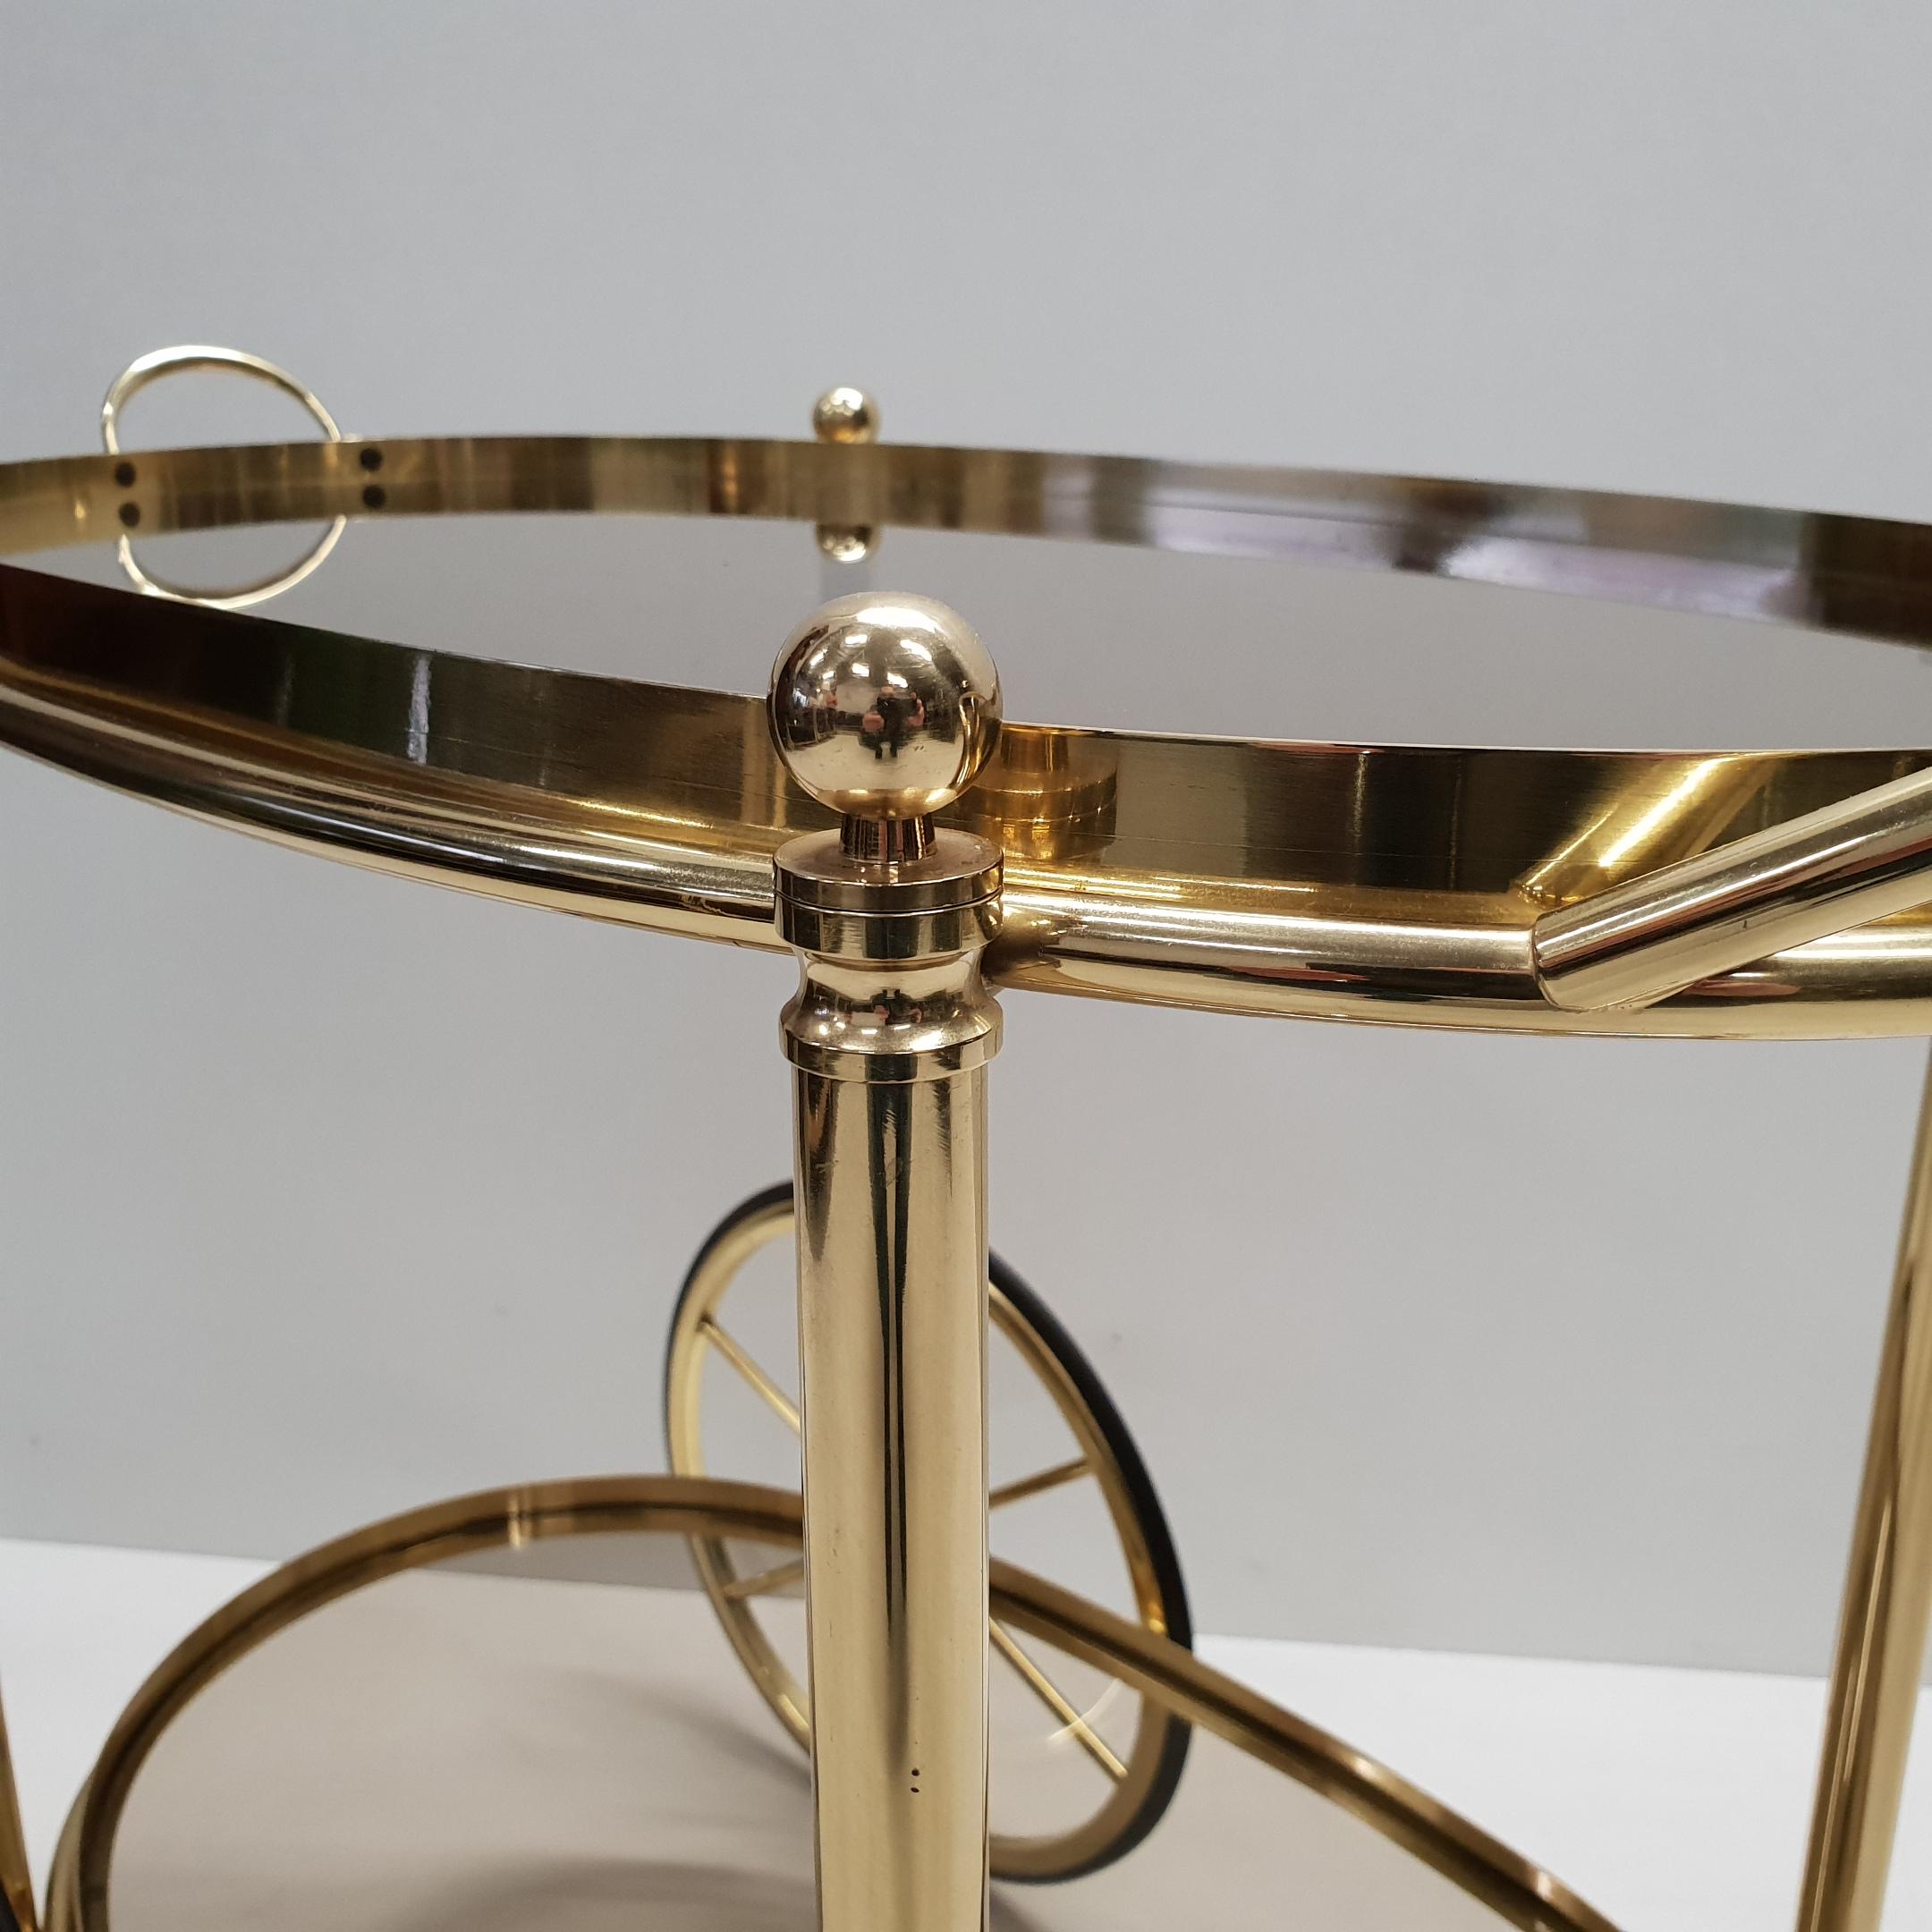 High Quality Italian Brass Trolley Bar Cart with Smoked Glass, 1980s For Sale 8